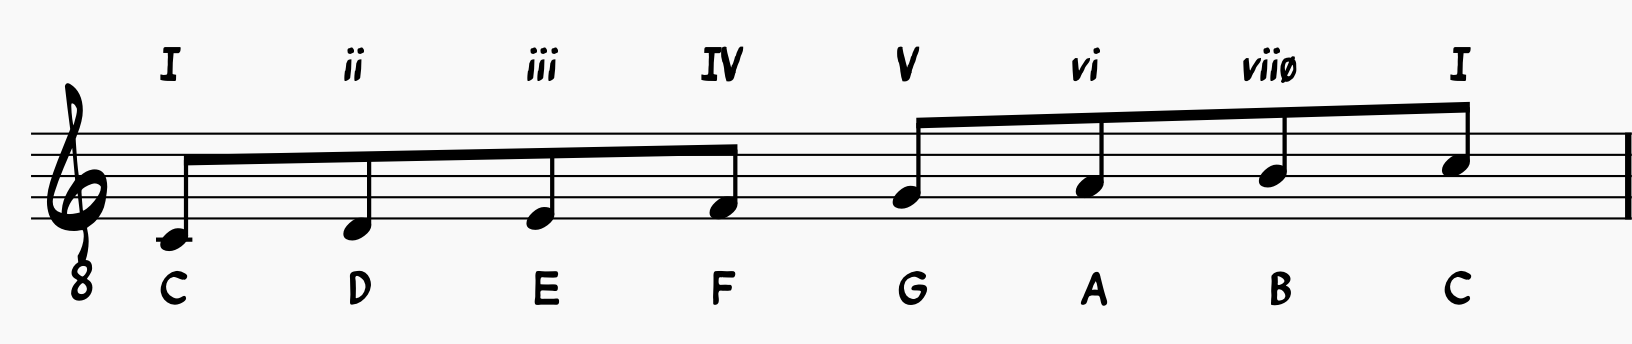 Chord Melody Basics: C major scale with Roman Numerals 